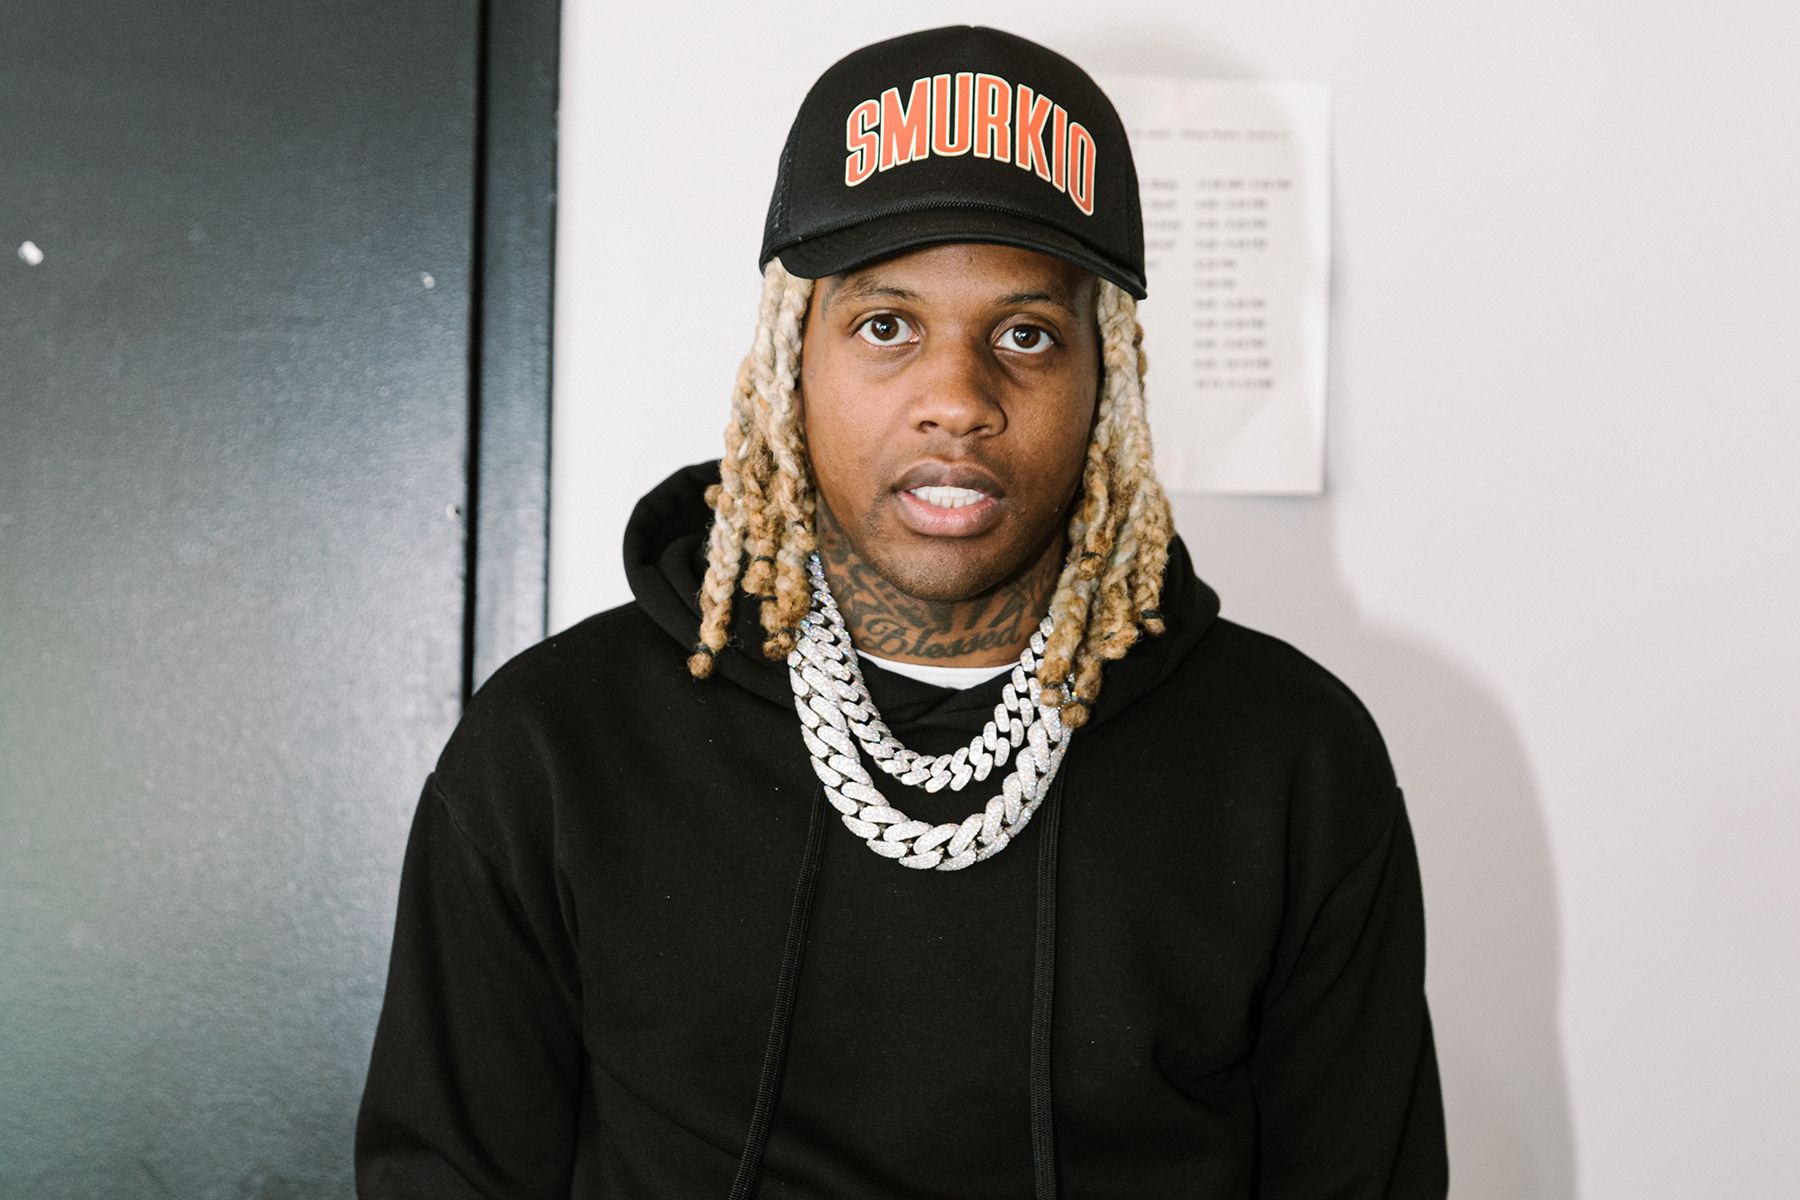 Durk shot in killed in his own home